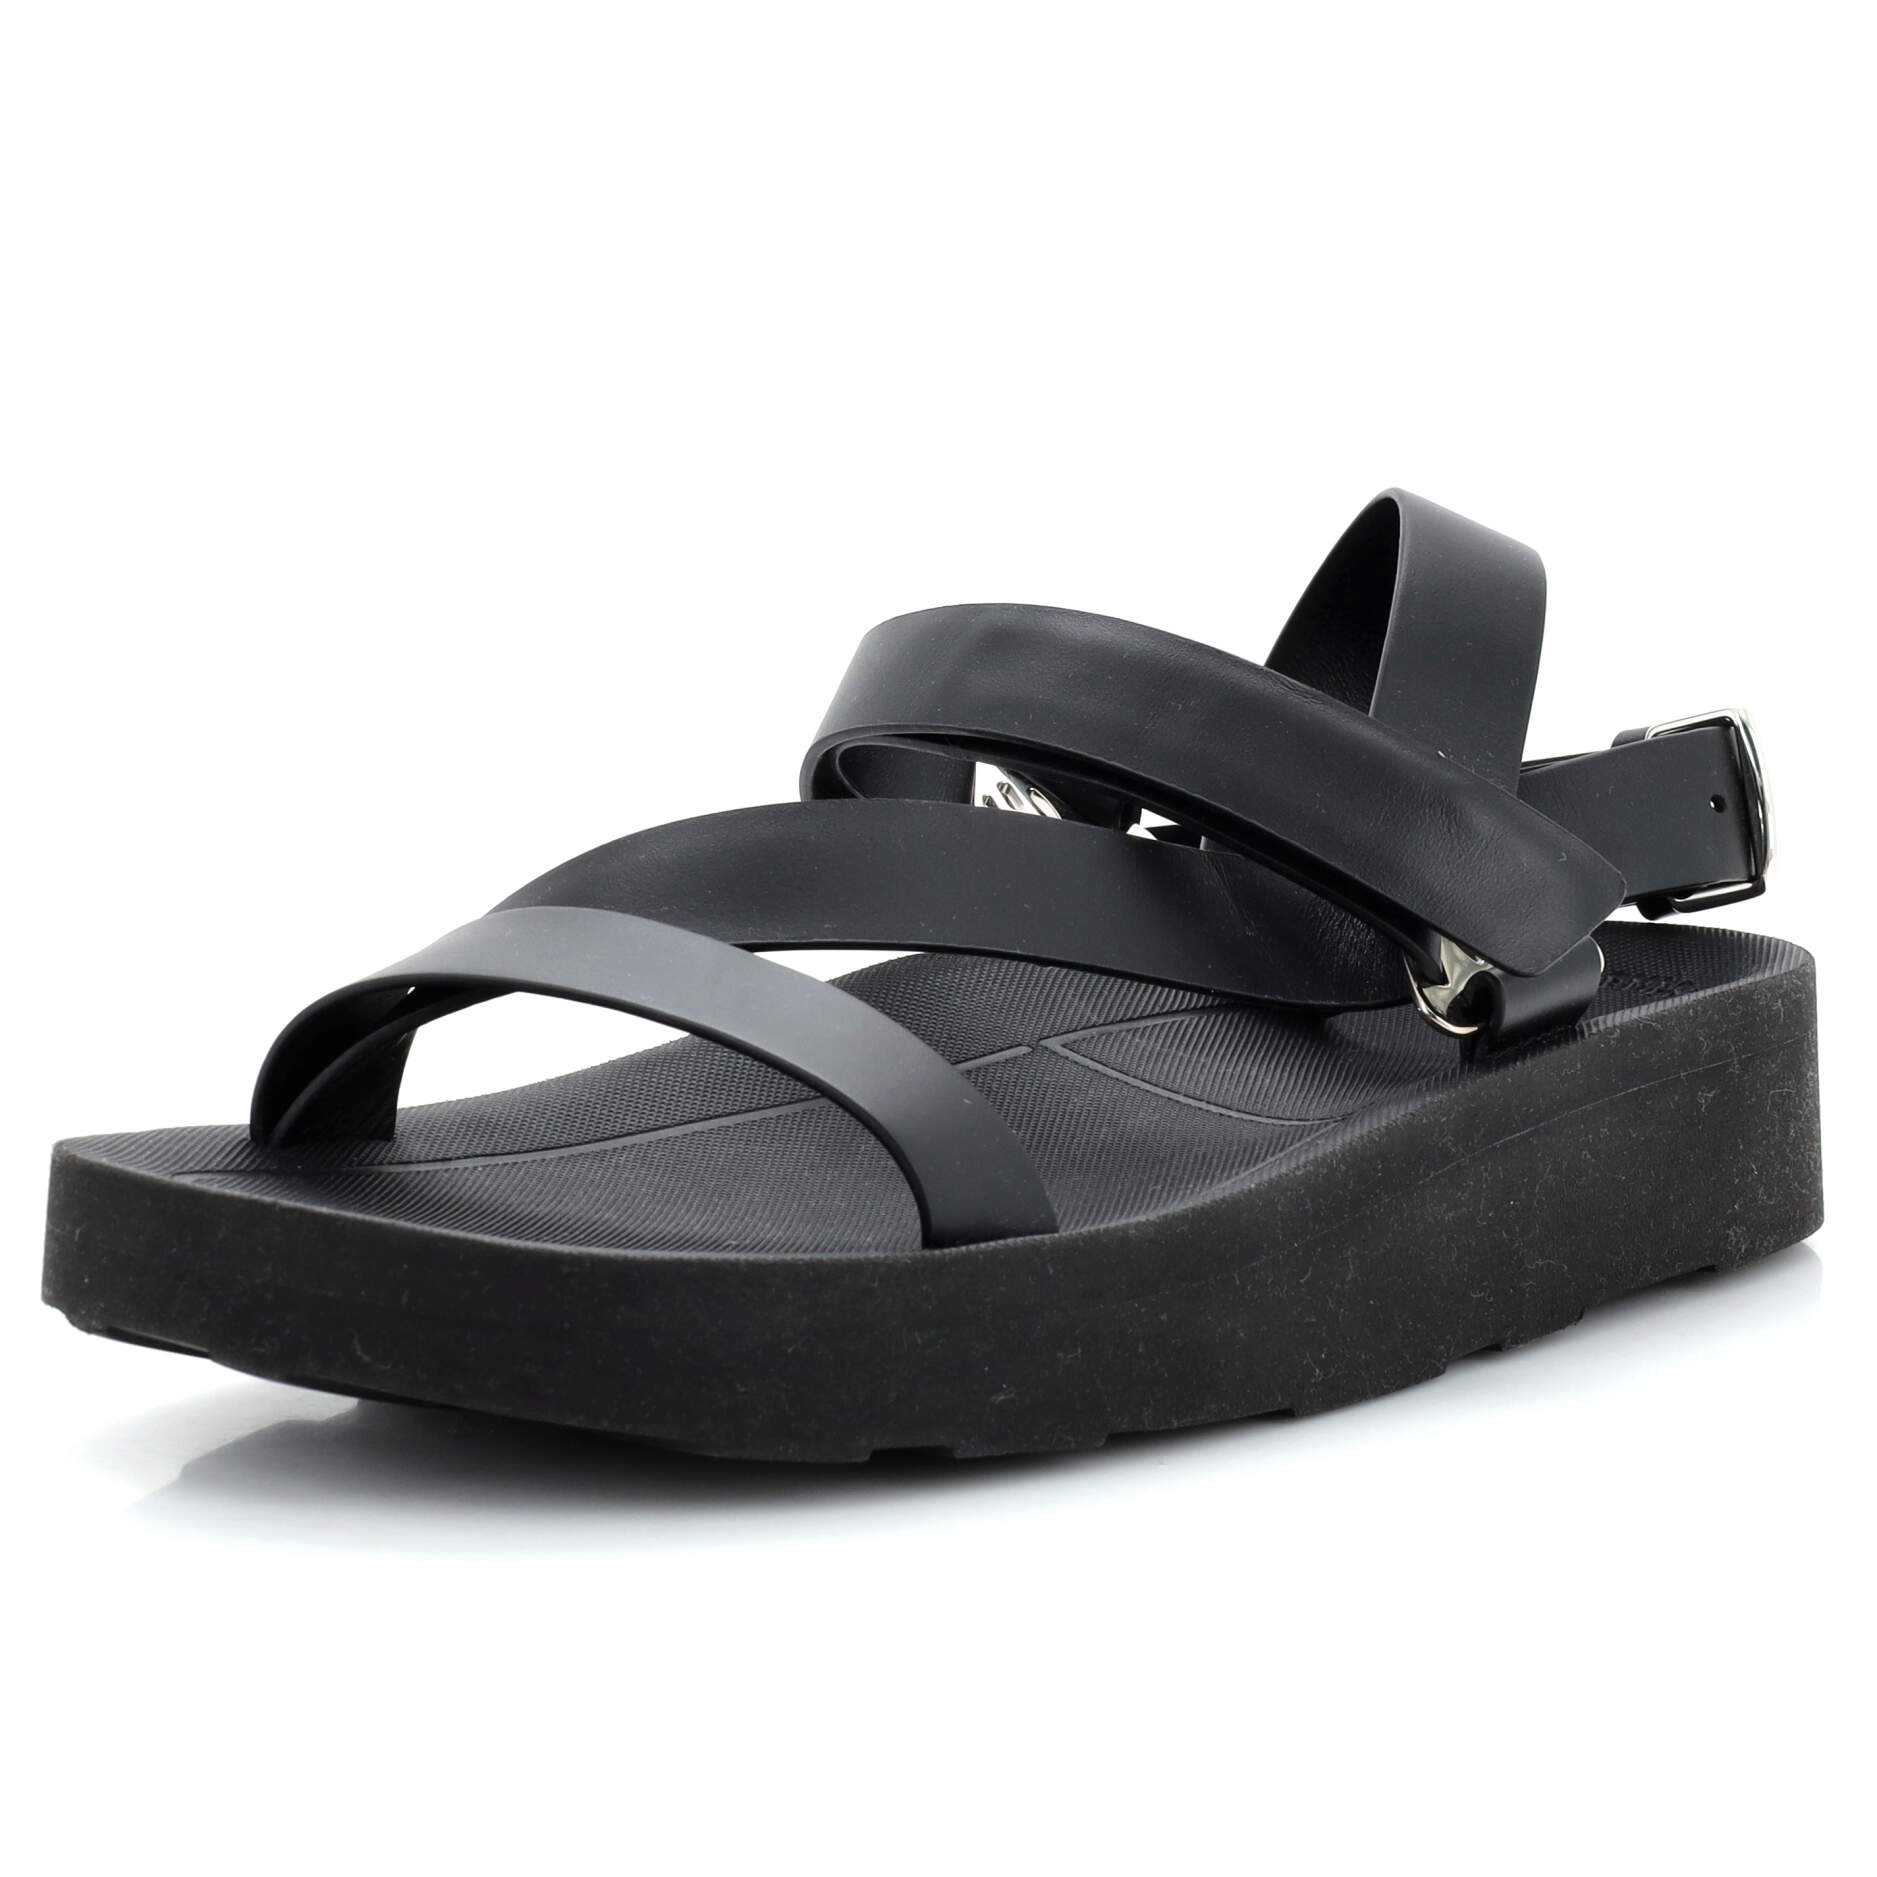 Women's Galaxy Sandals Leather